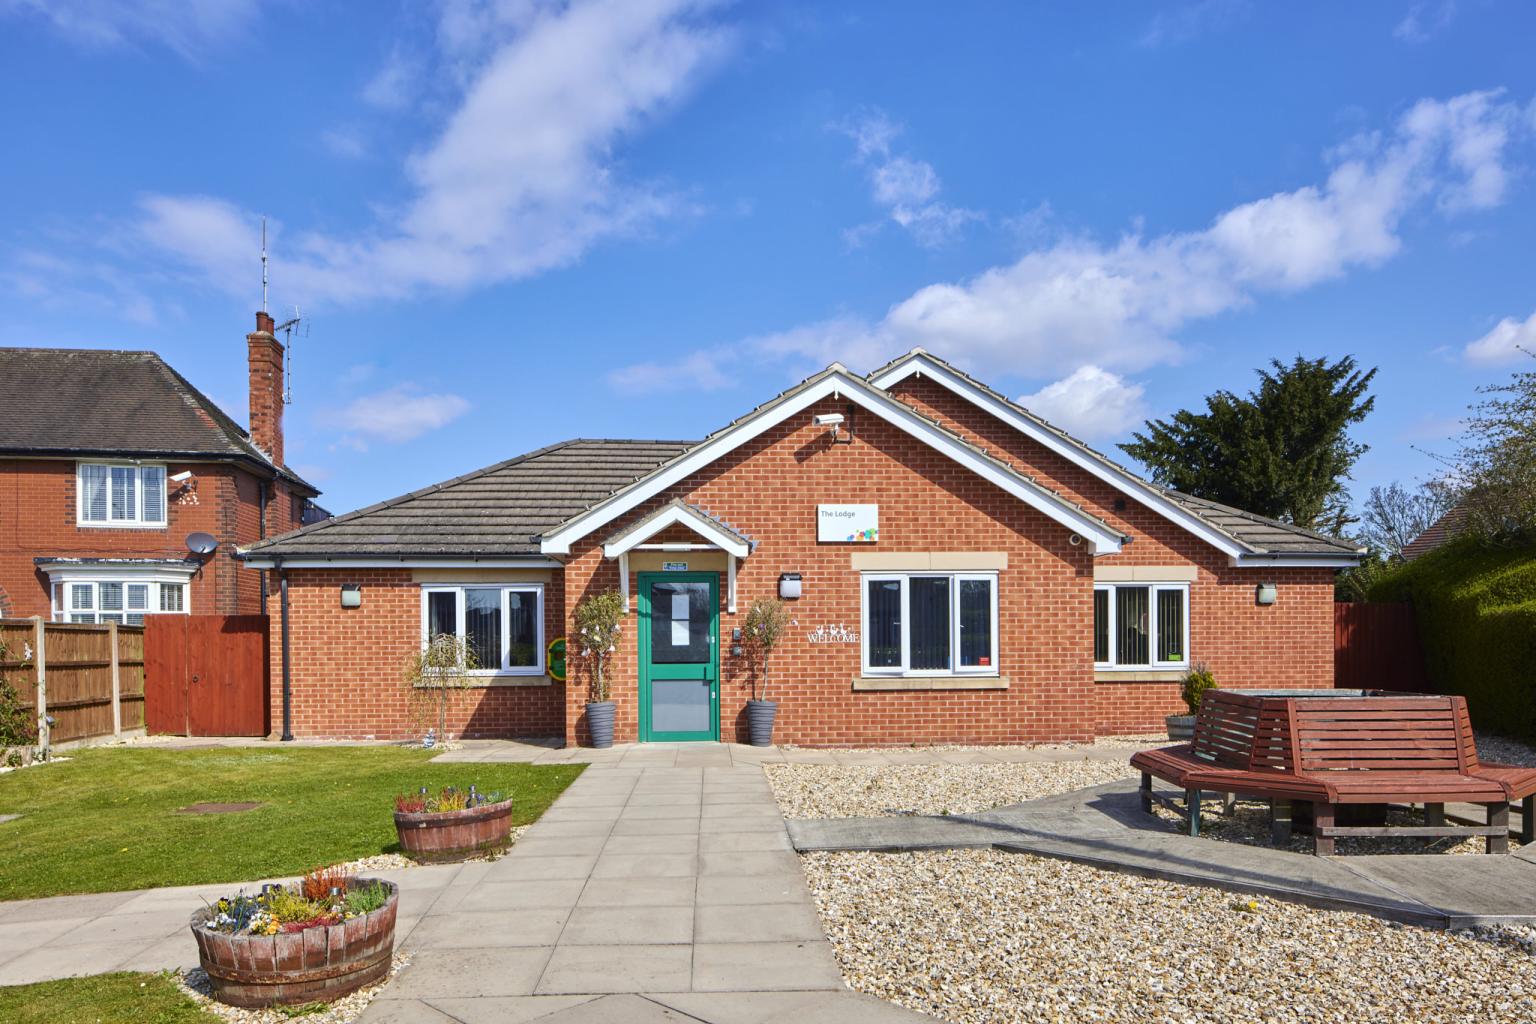 The Lodge care home in Swallownest